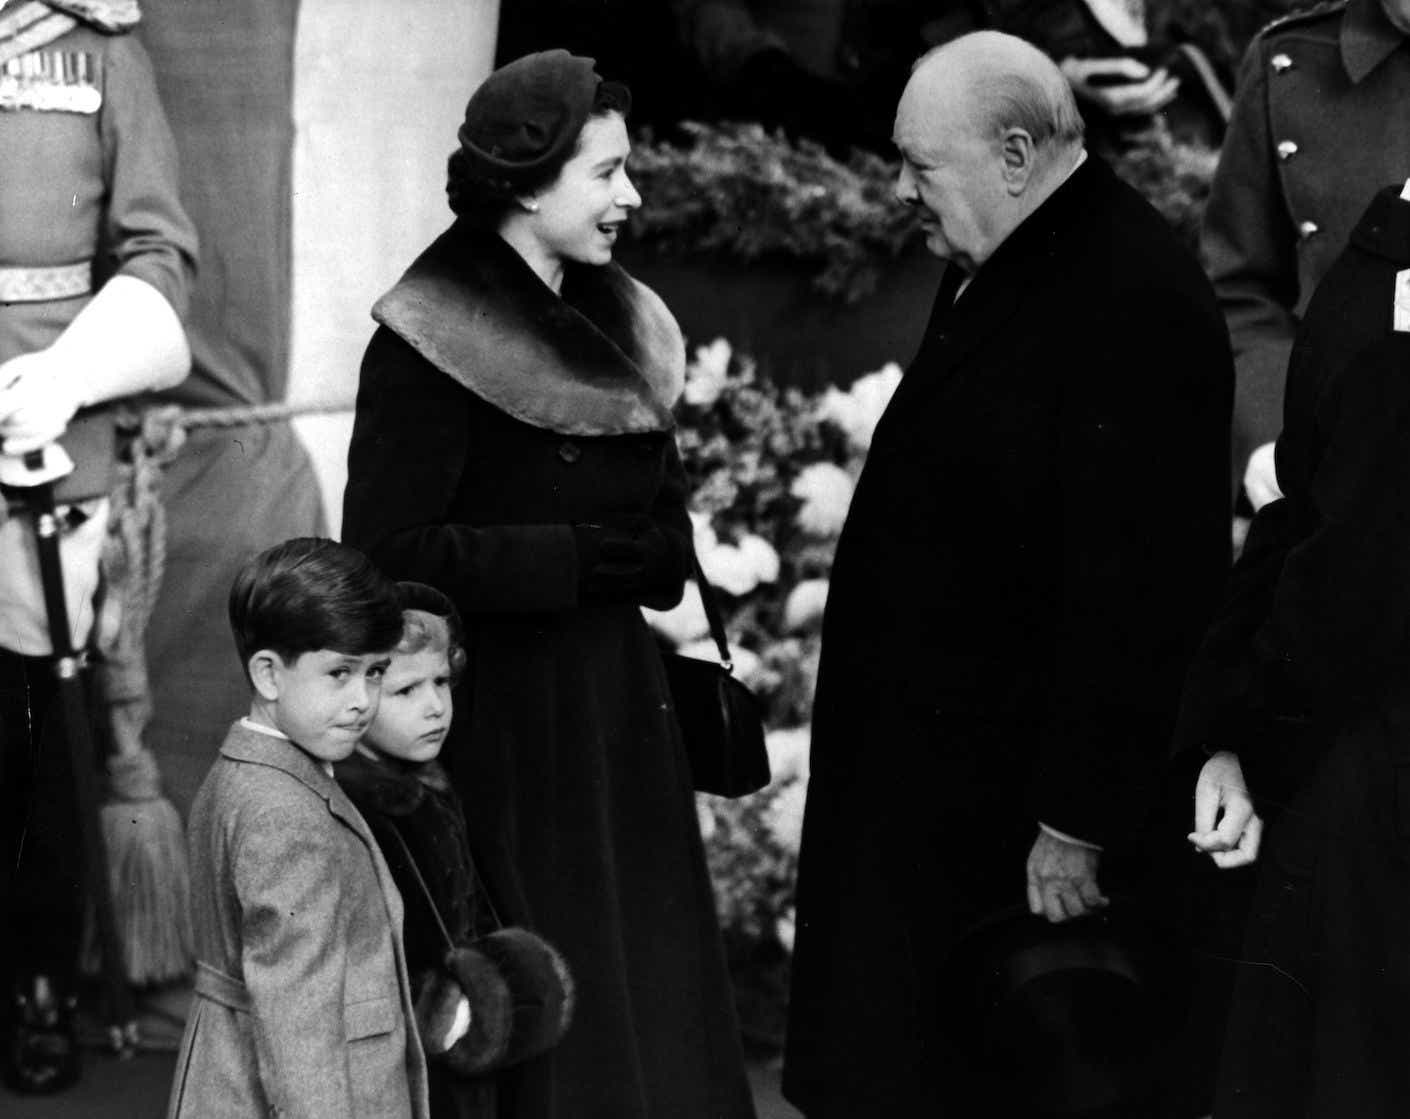 Queen Elizabeth II with Prince Charles and Princess Anne chat with Sir Winston Churchill in 1953 outside of a car.